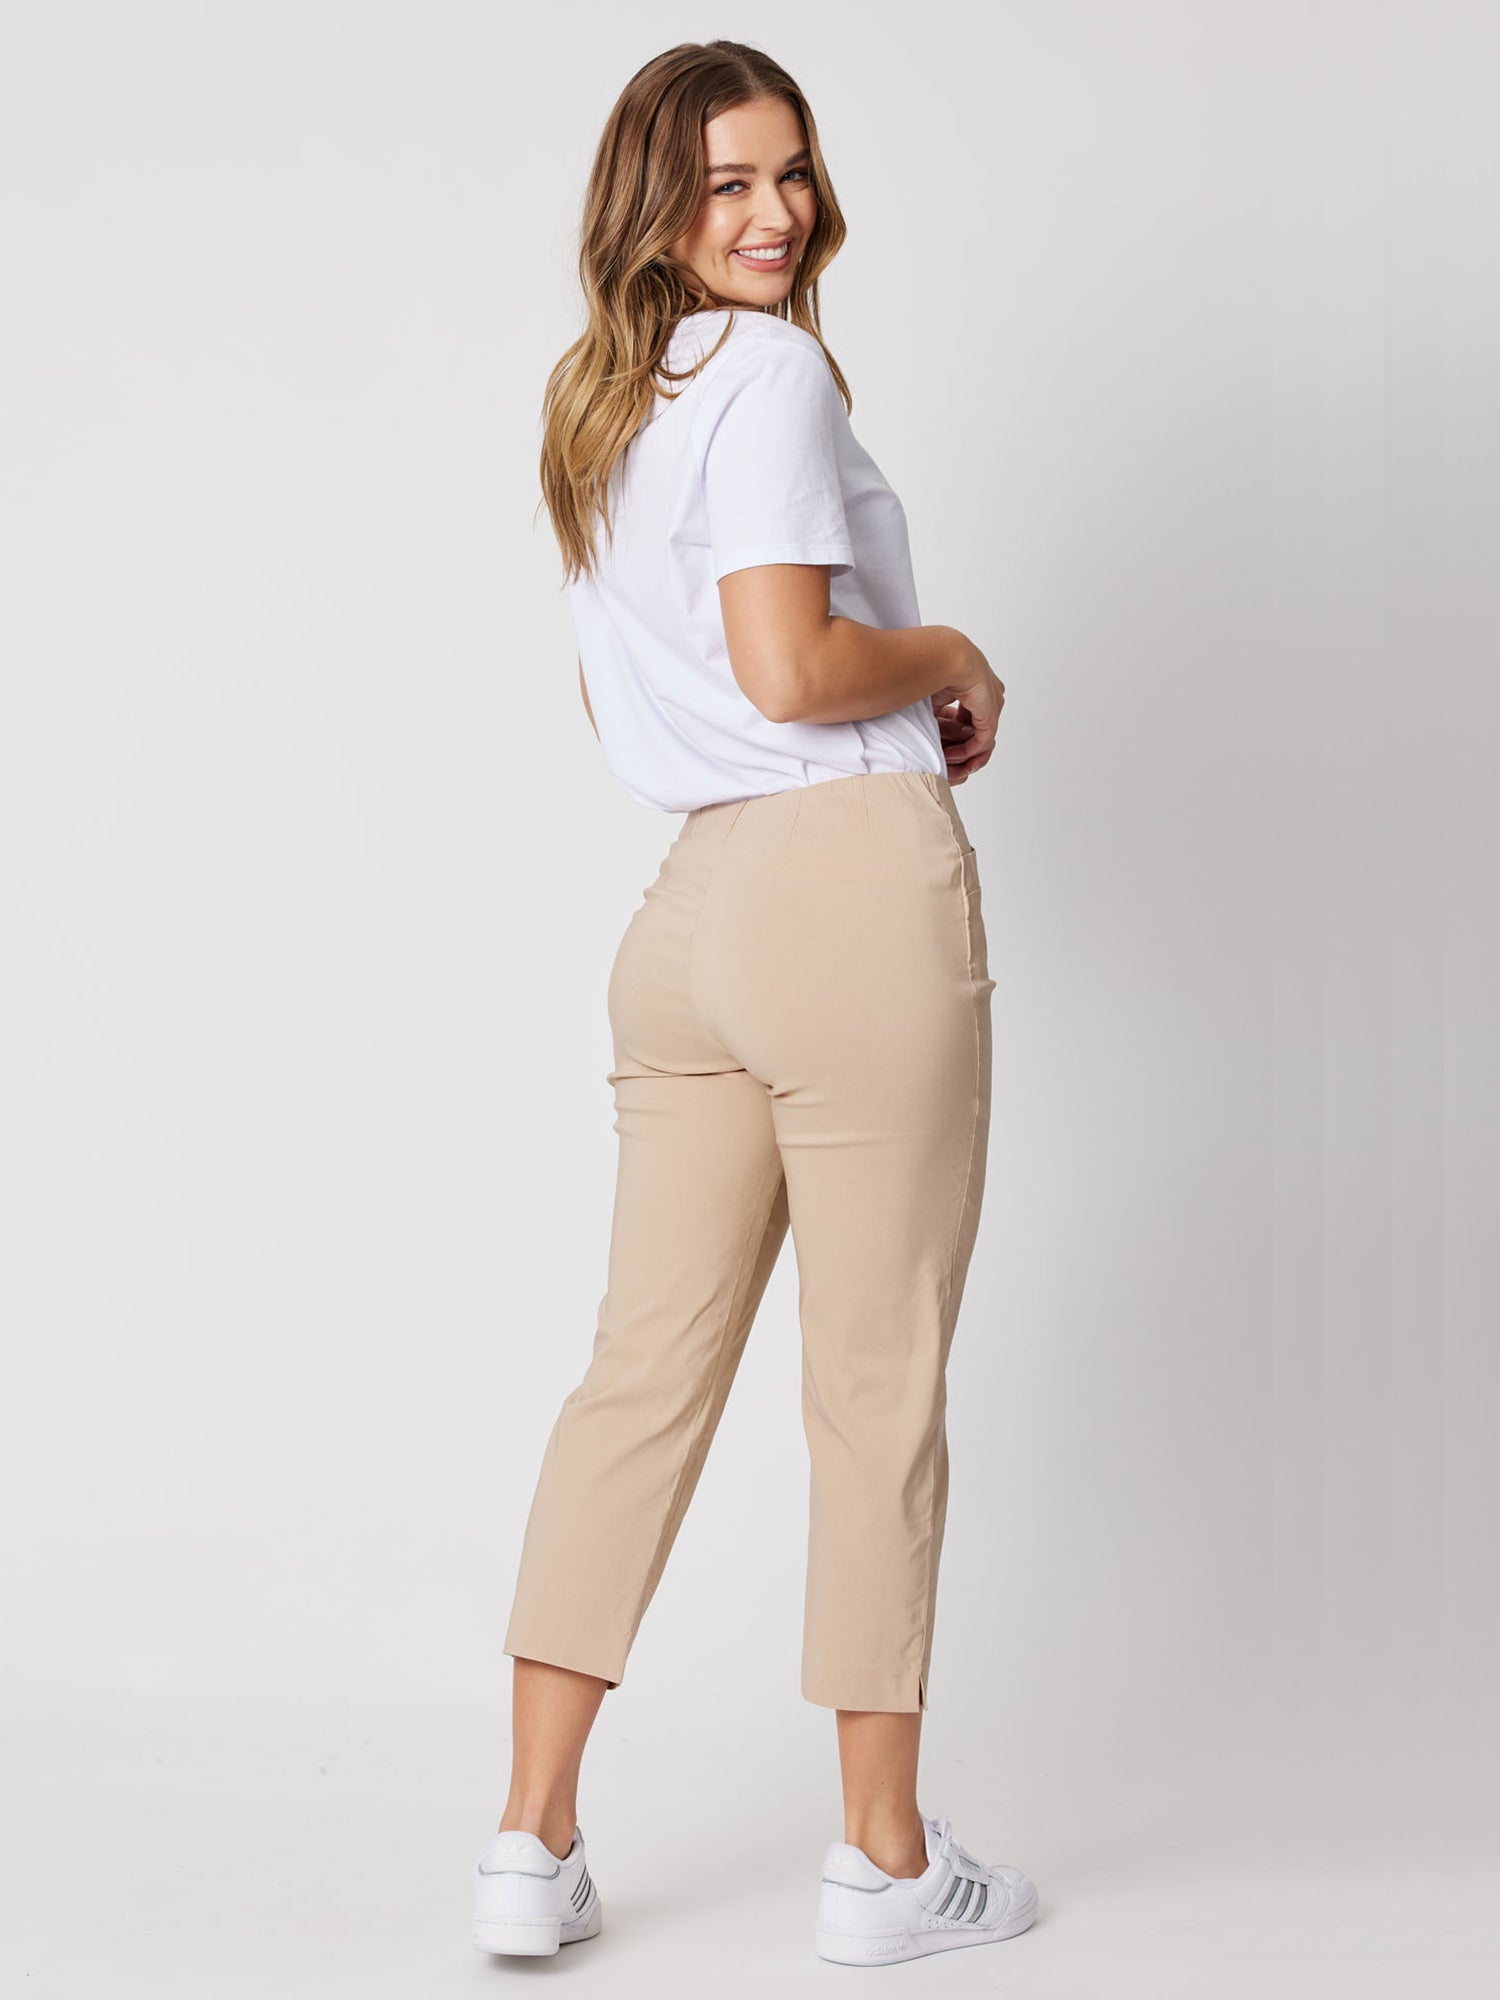 MCo Black Stretch Bengaline Trousers  MCo